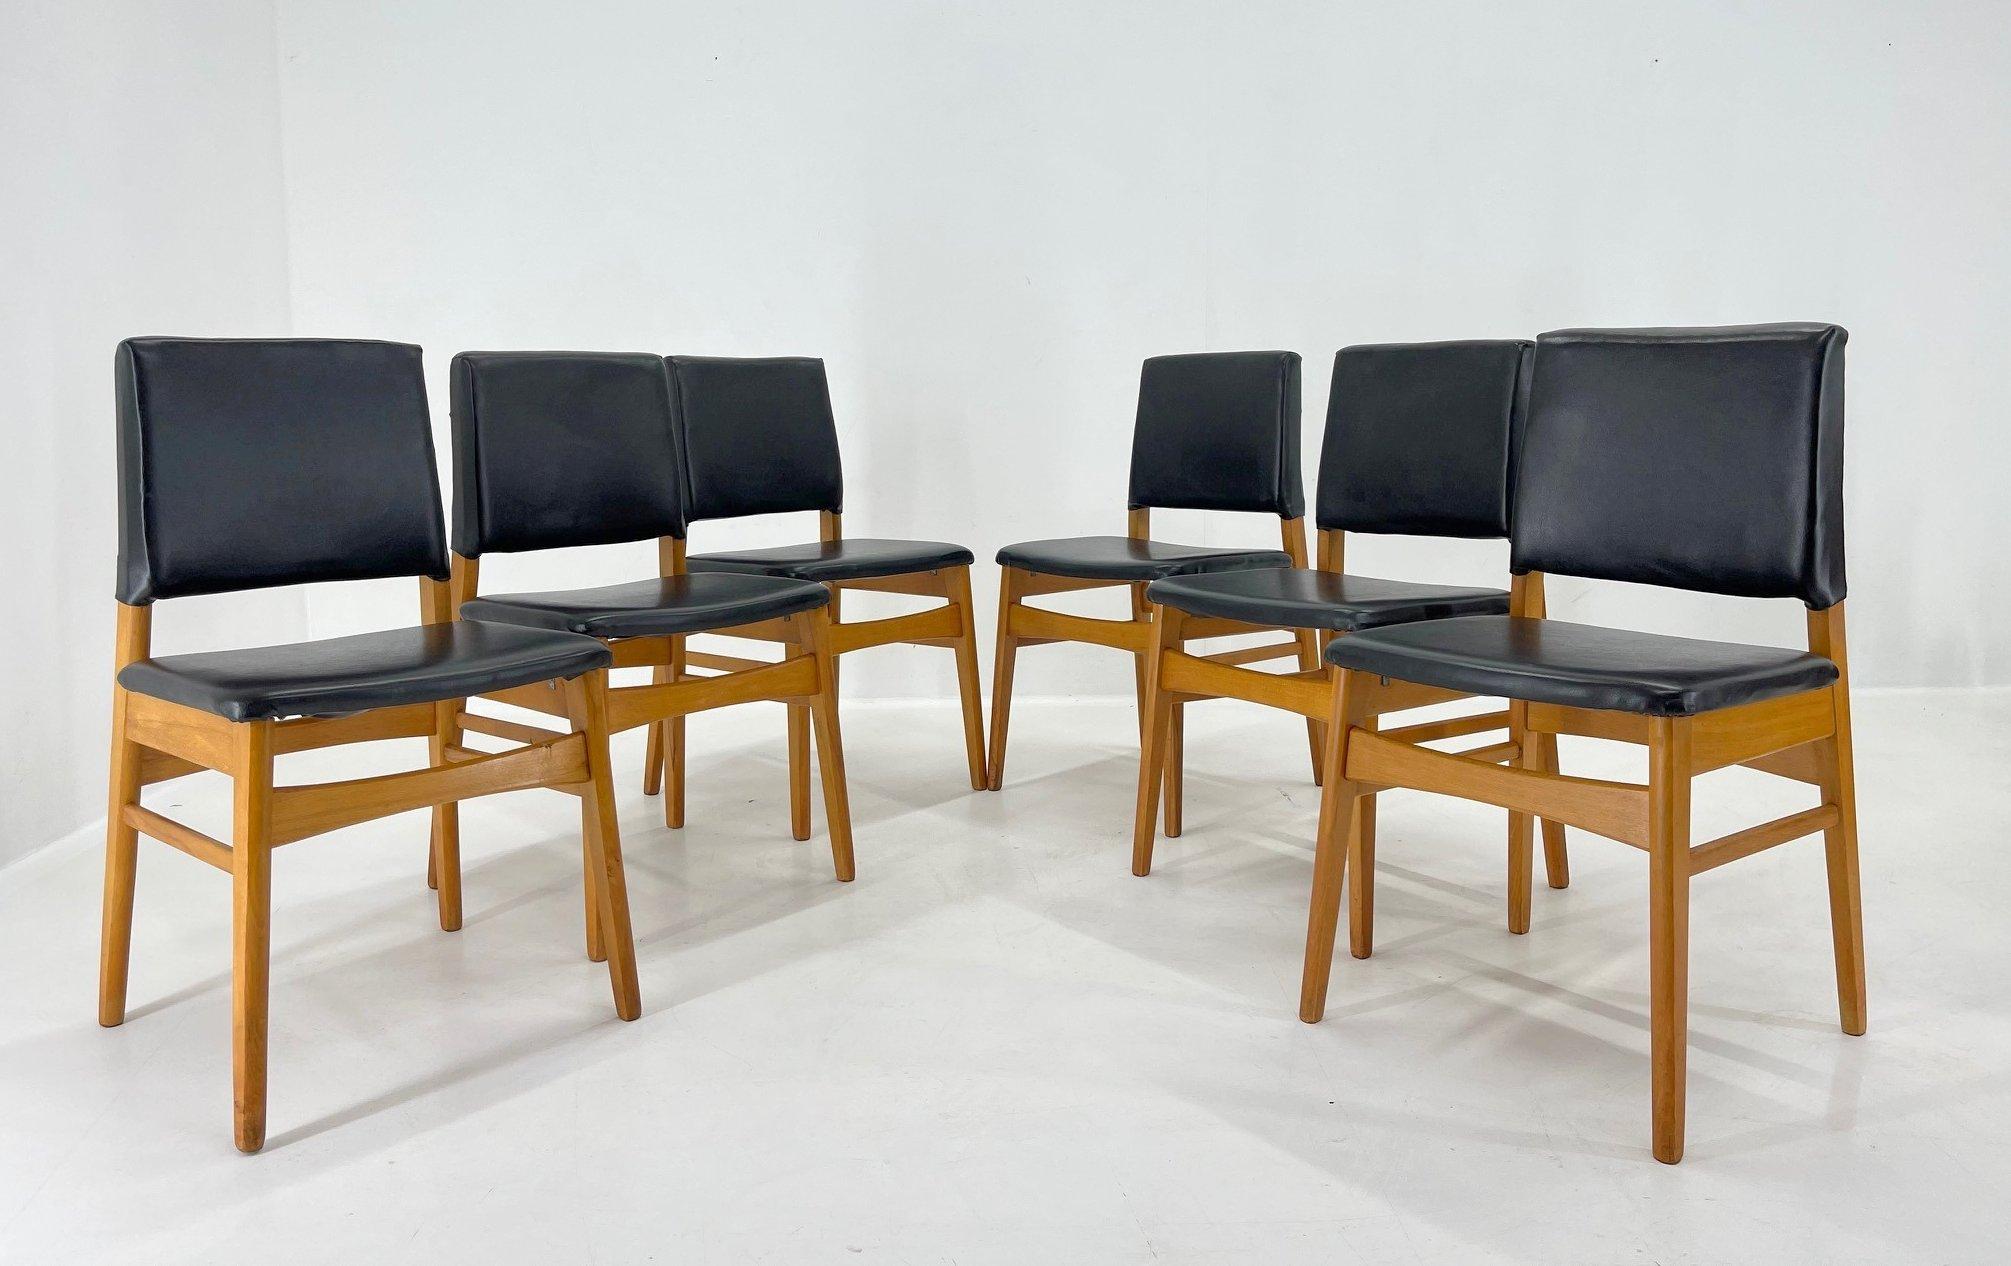 Set of 6 Leatherette & Wood Chairs, Czechoslovakia, 1960's For Sale 7